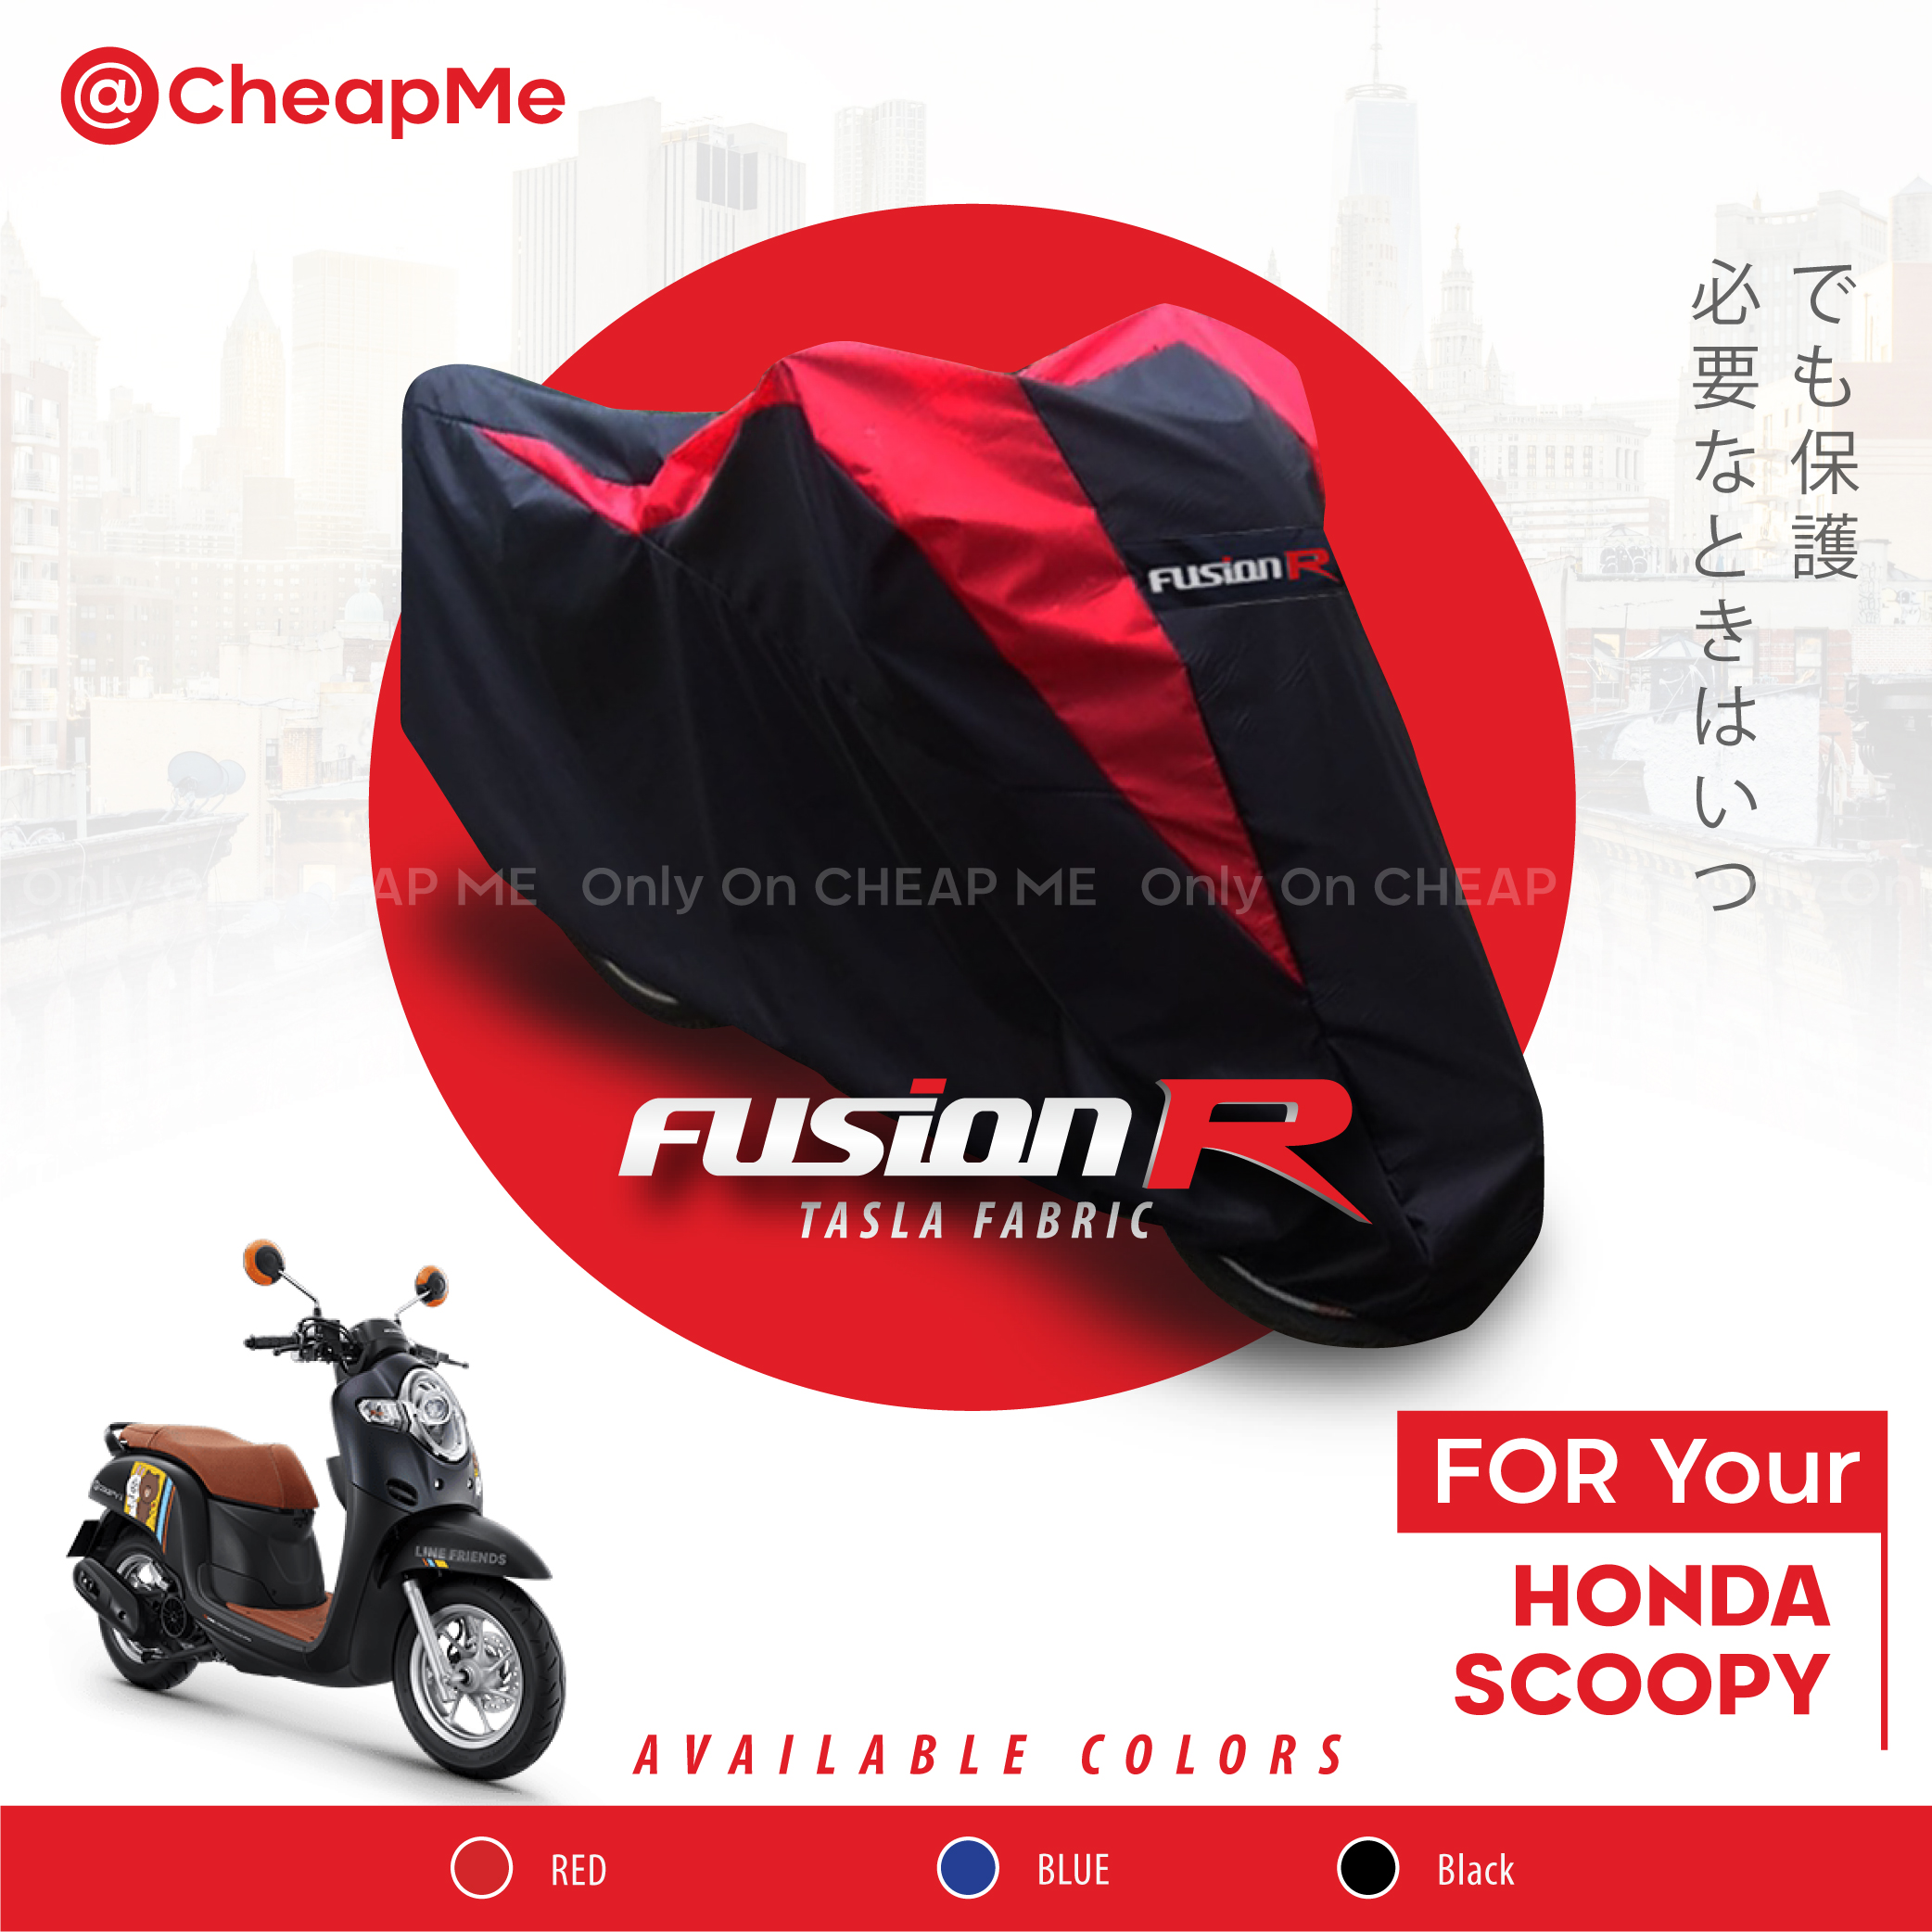 COVER MOTOR SCOOPY PREMIUM QUALITY / SARUNG MOTOR SCOOPY FUSION R / PENUTUP SELIMUT MOTOR HONDA SCOOPY